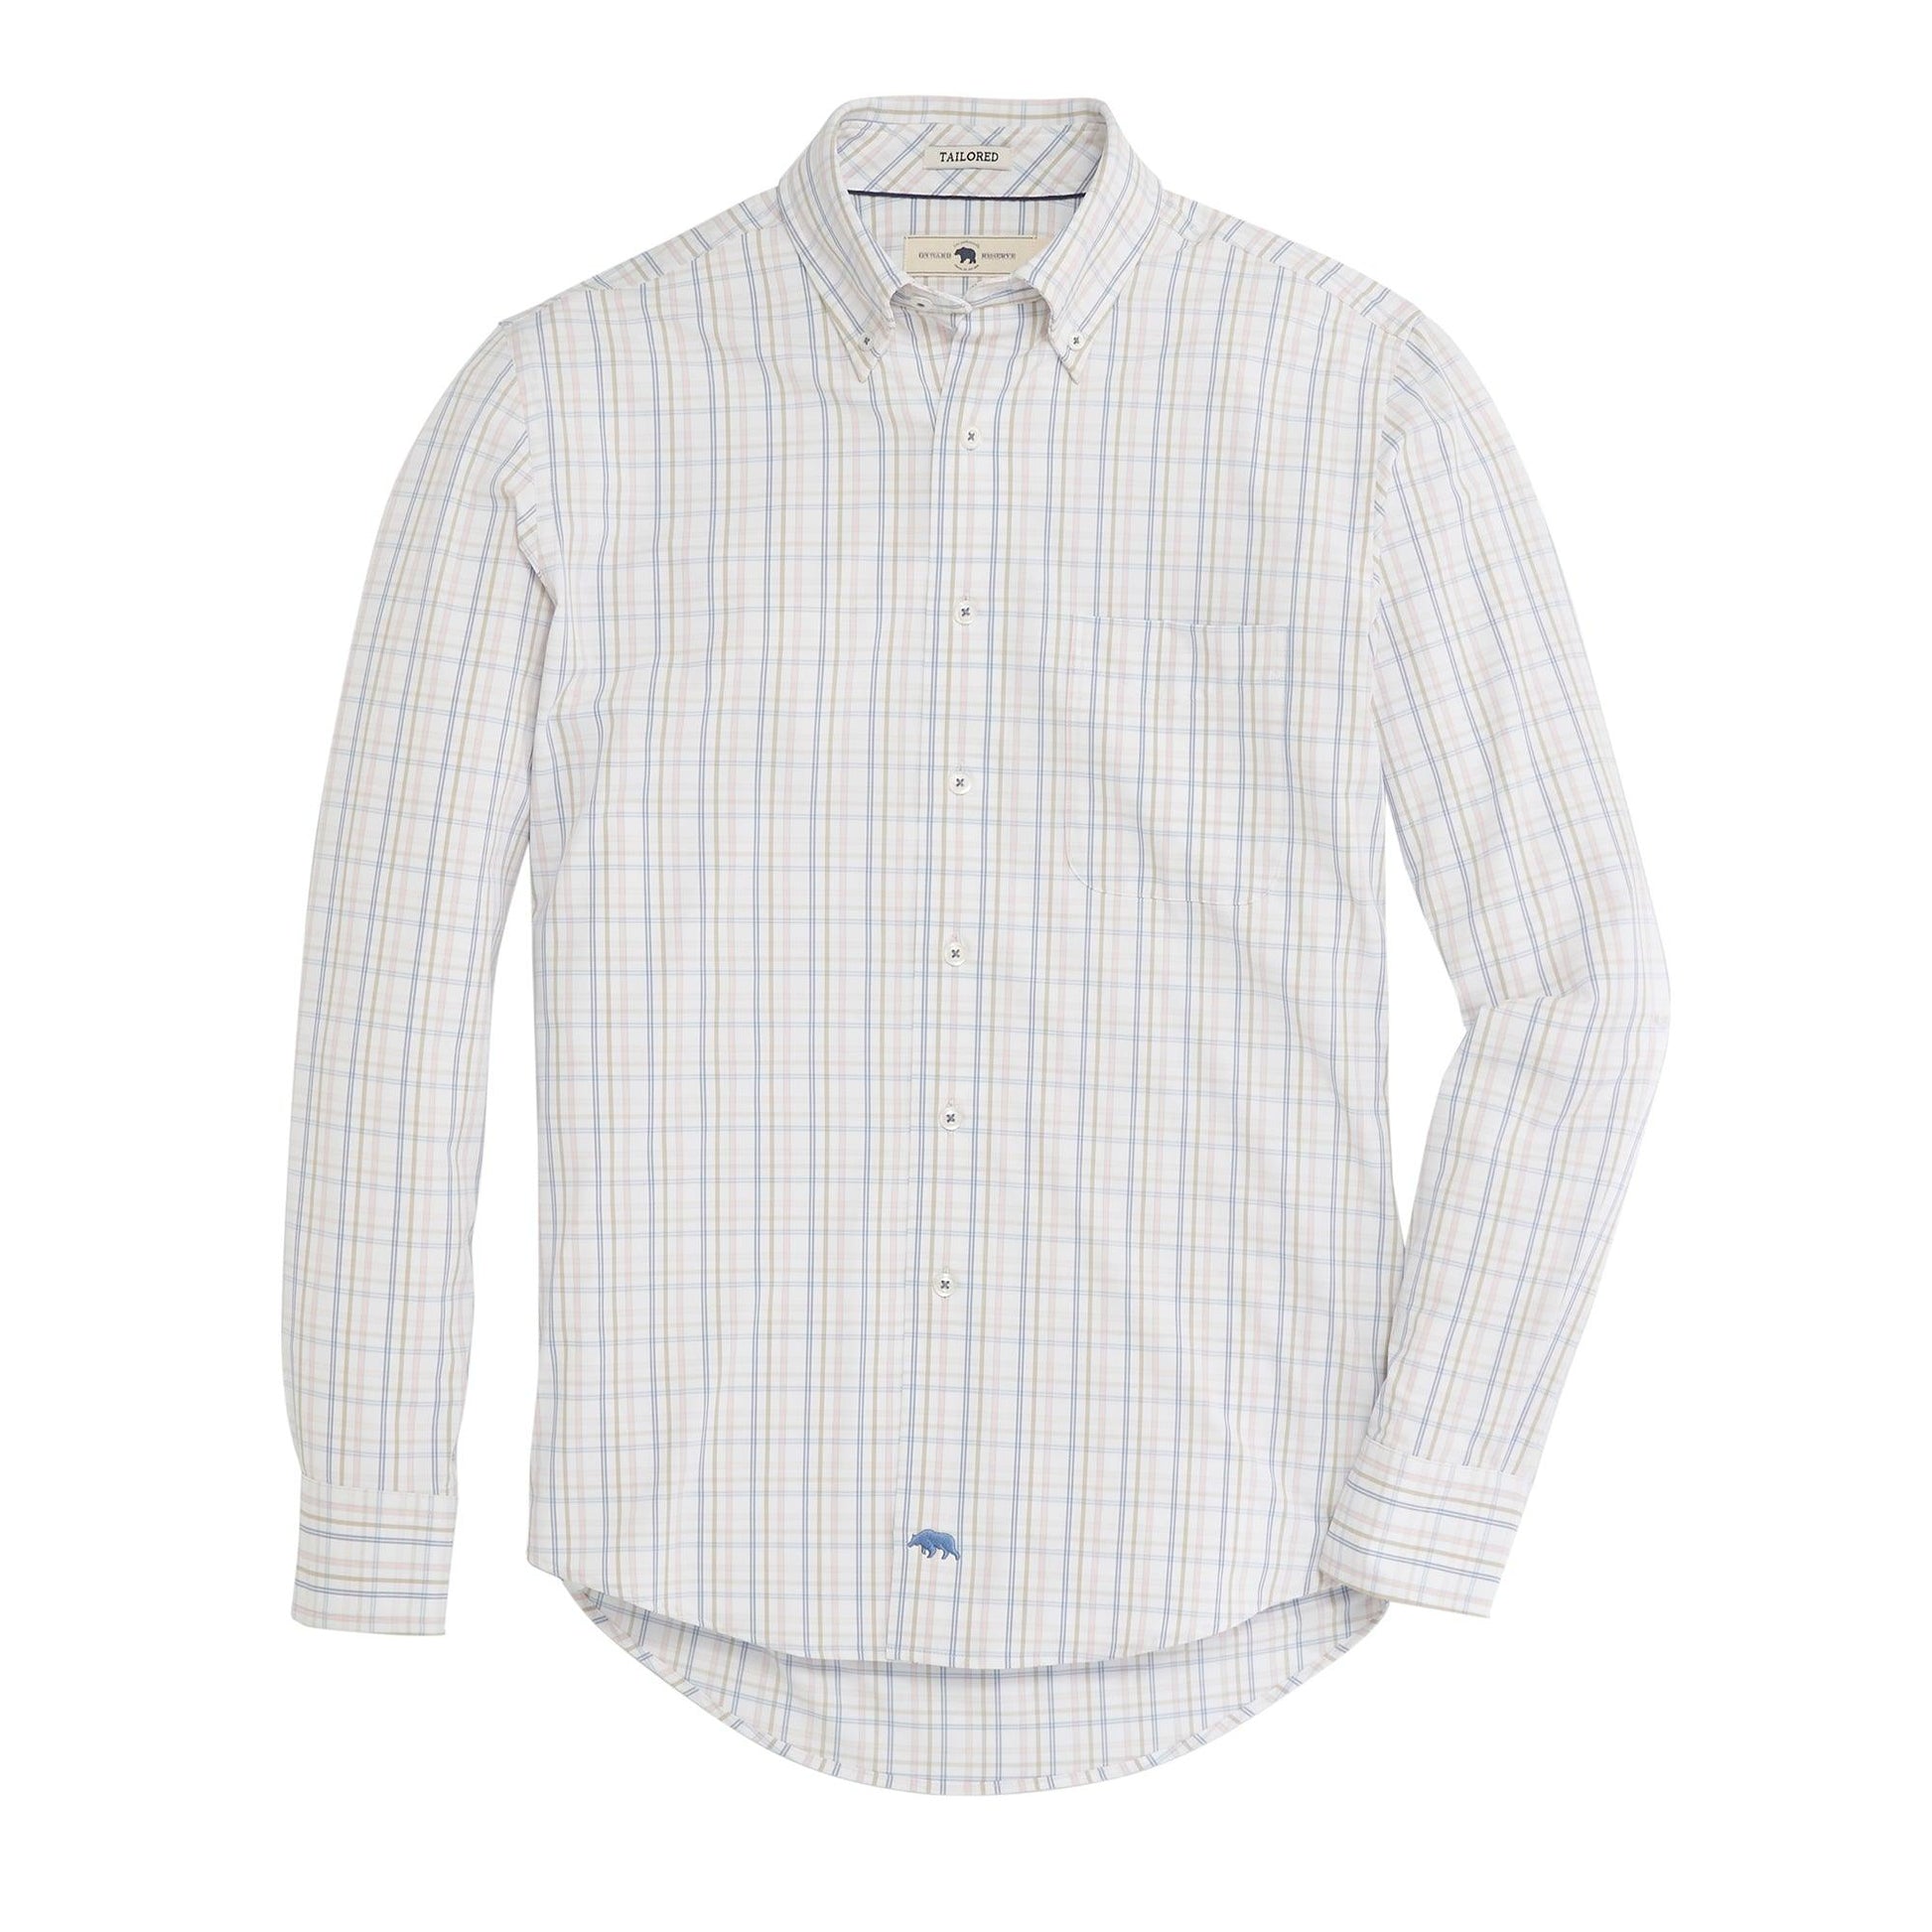 Pompano Tailored Fit Performance Button Down - Onward Reserve